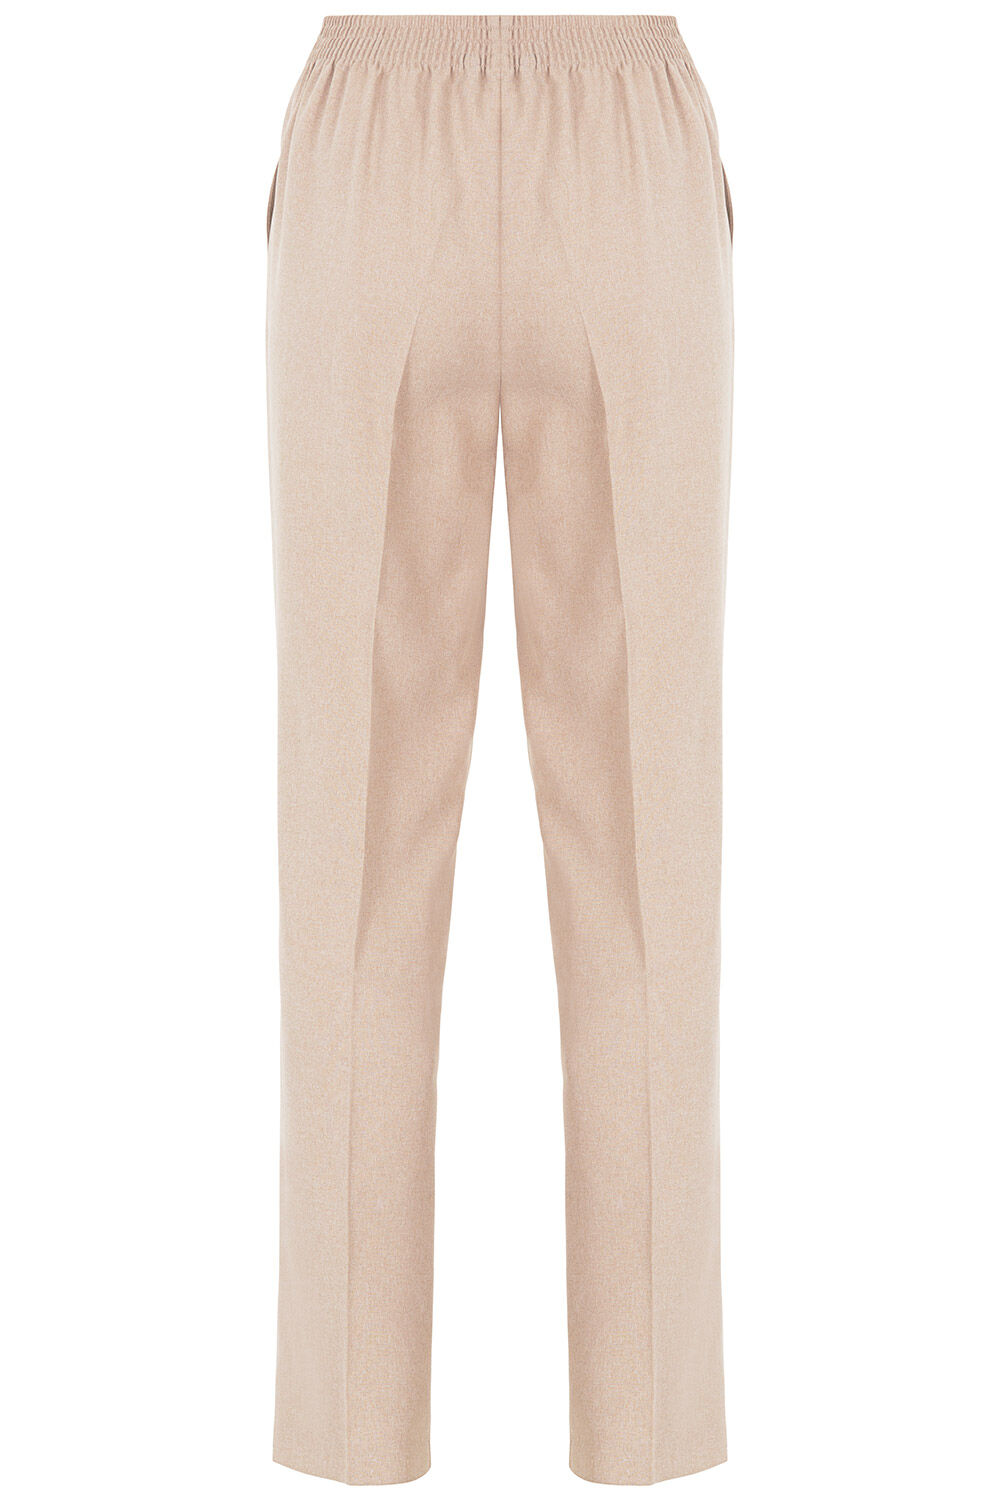 Buy Pull On Classic Leg Trousers | Home Delivery | Bonmarché